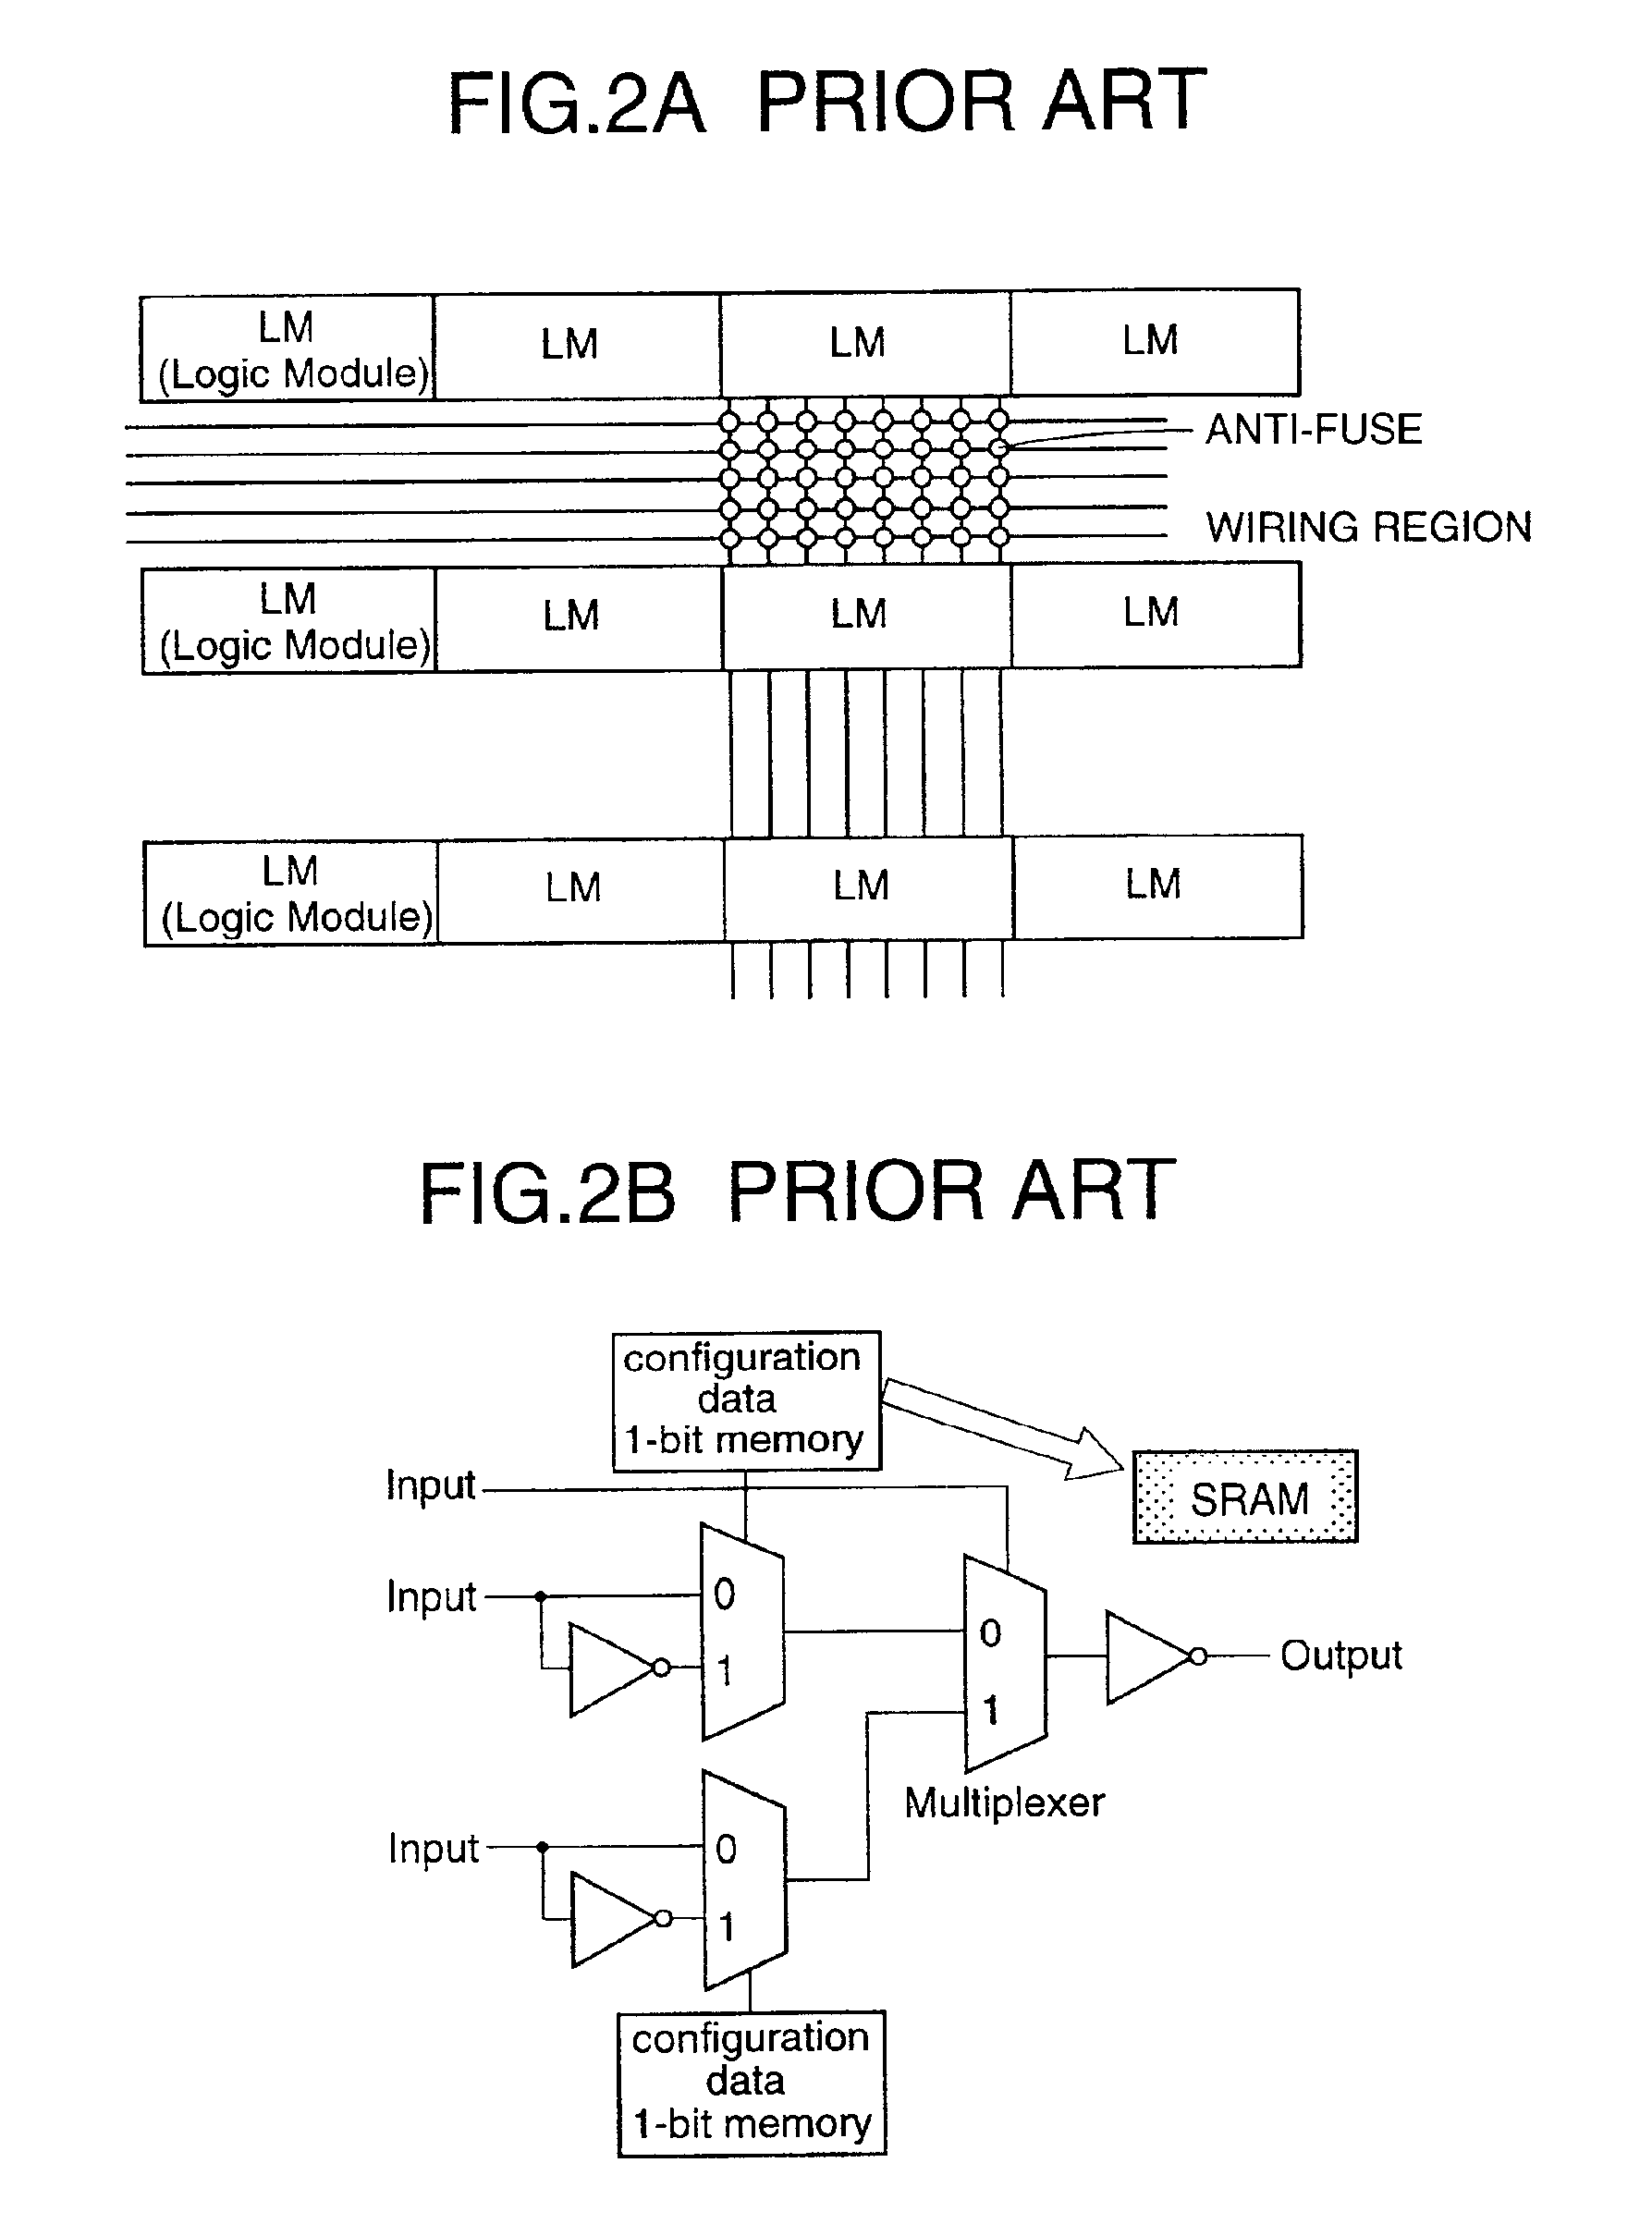 Function reconfigurable semiconductor device and integrated circuit configuring the semiconductor device